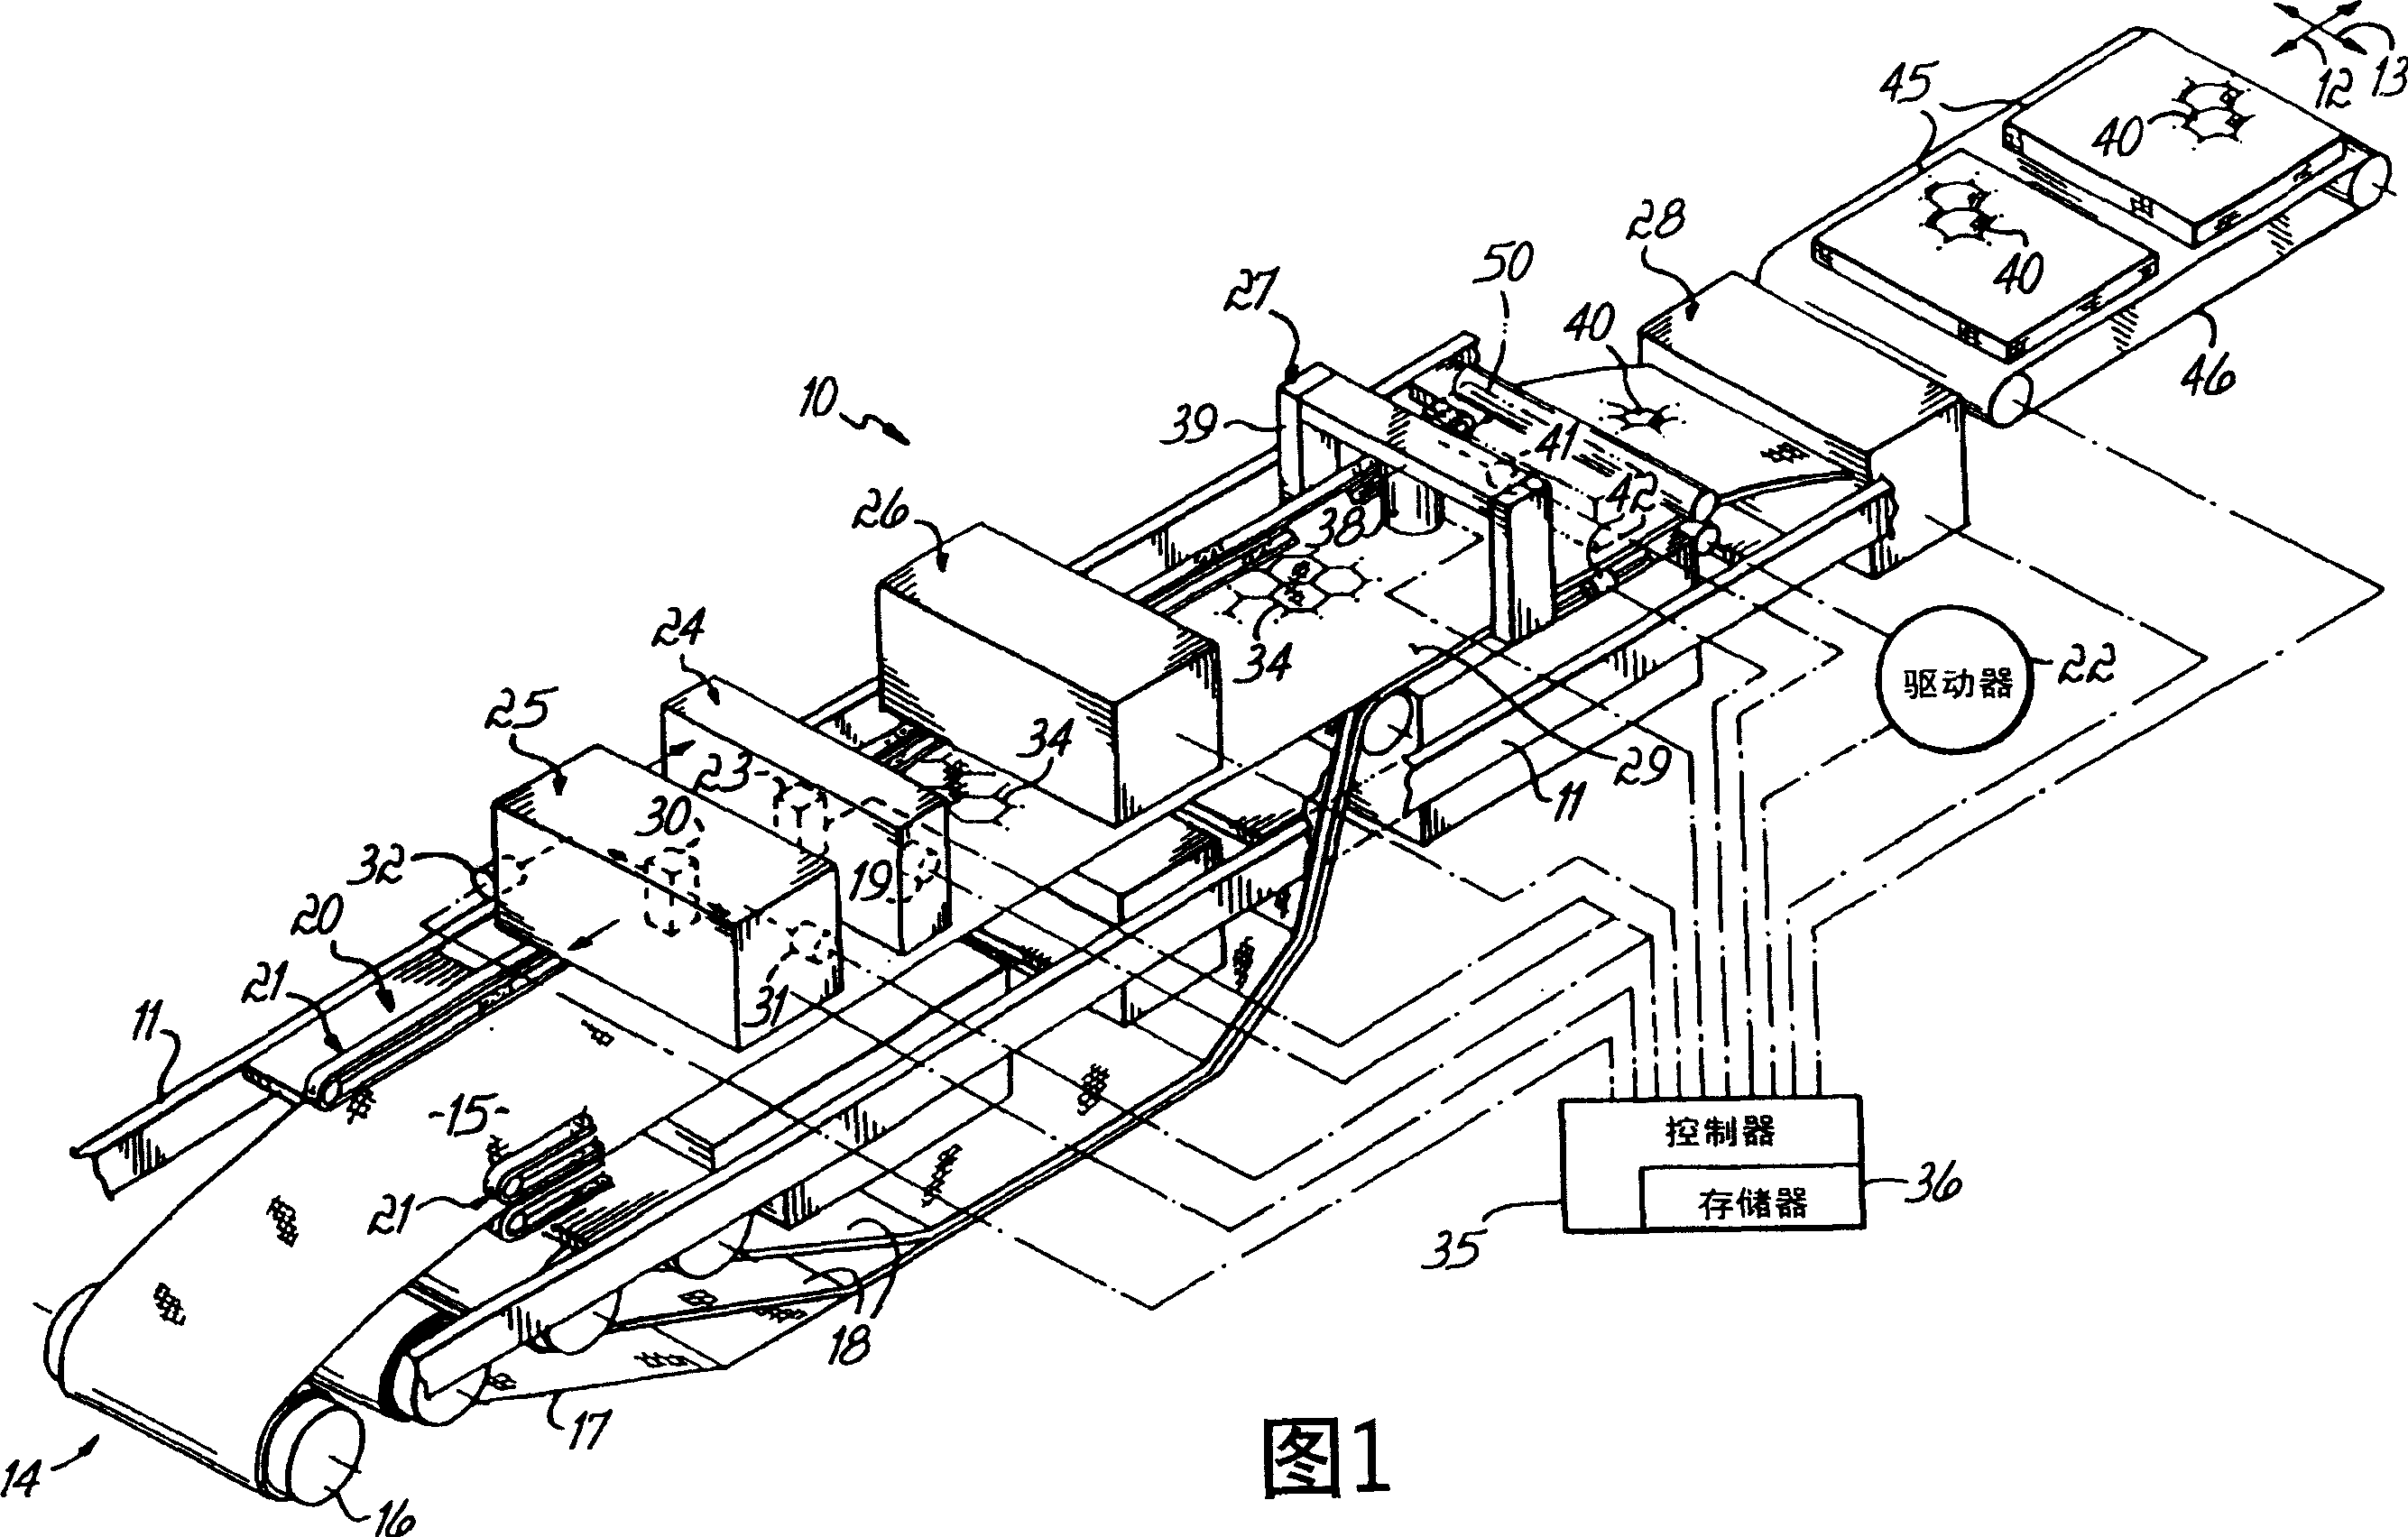 Method and apparatus for ink jet printing